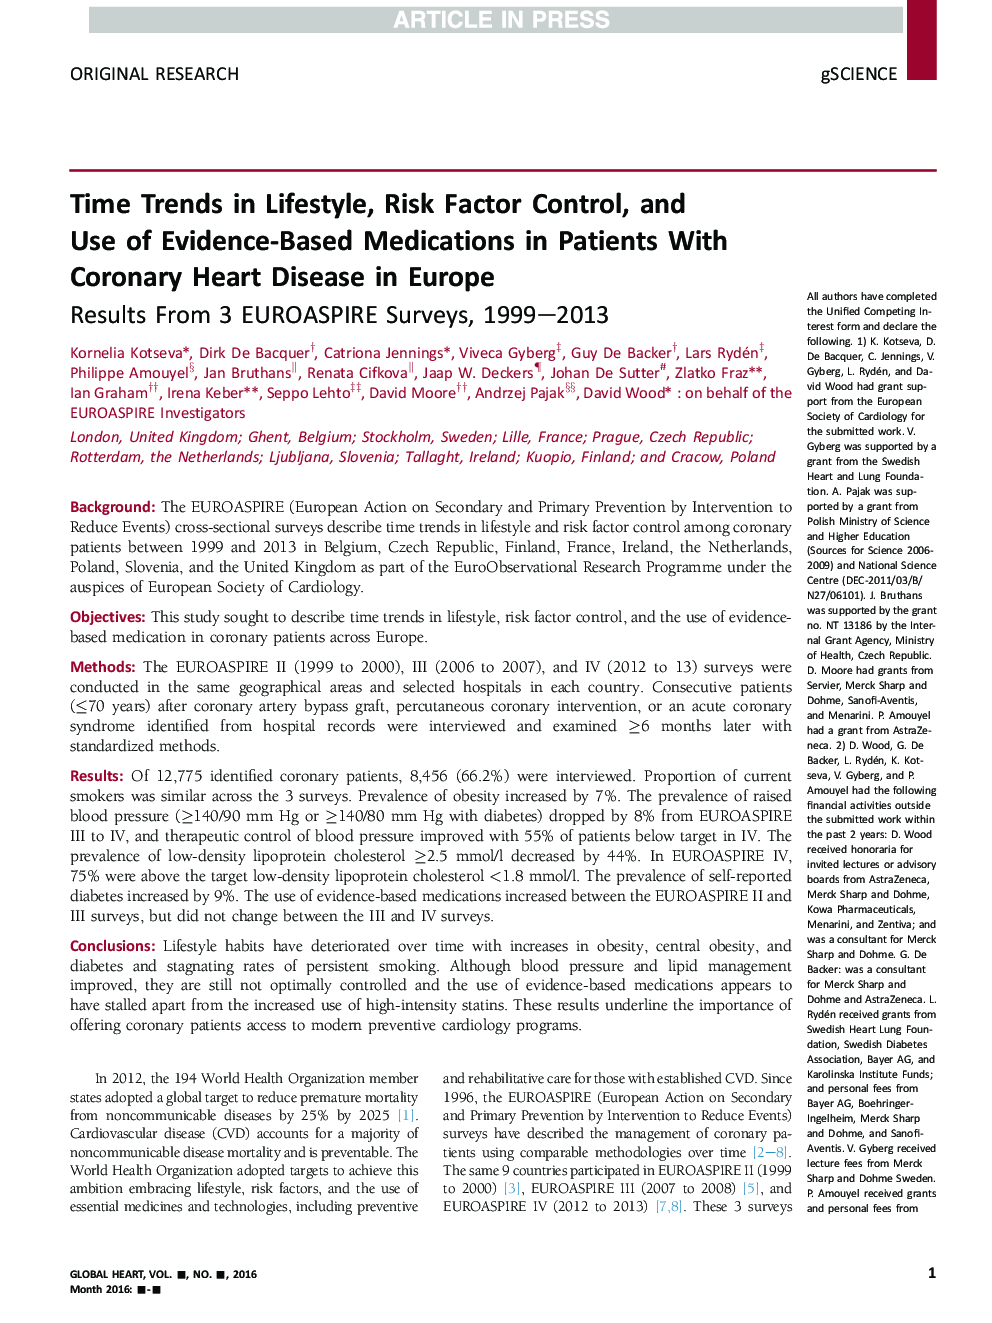 Time Trends in Lifestyle, Risk Factor Control, and Use of Evidence-Based Medications in Patients With Coronary Heart Disease in Europe